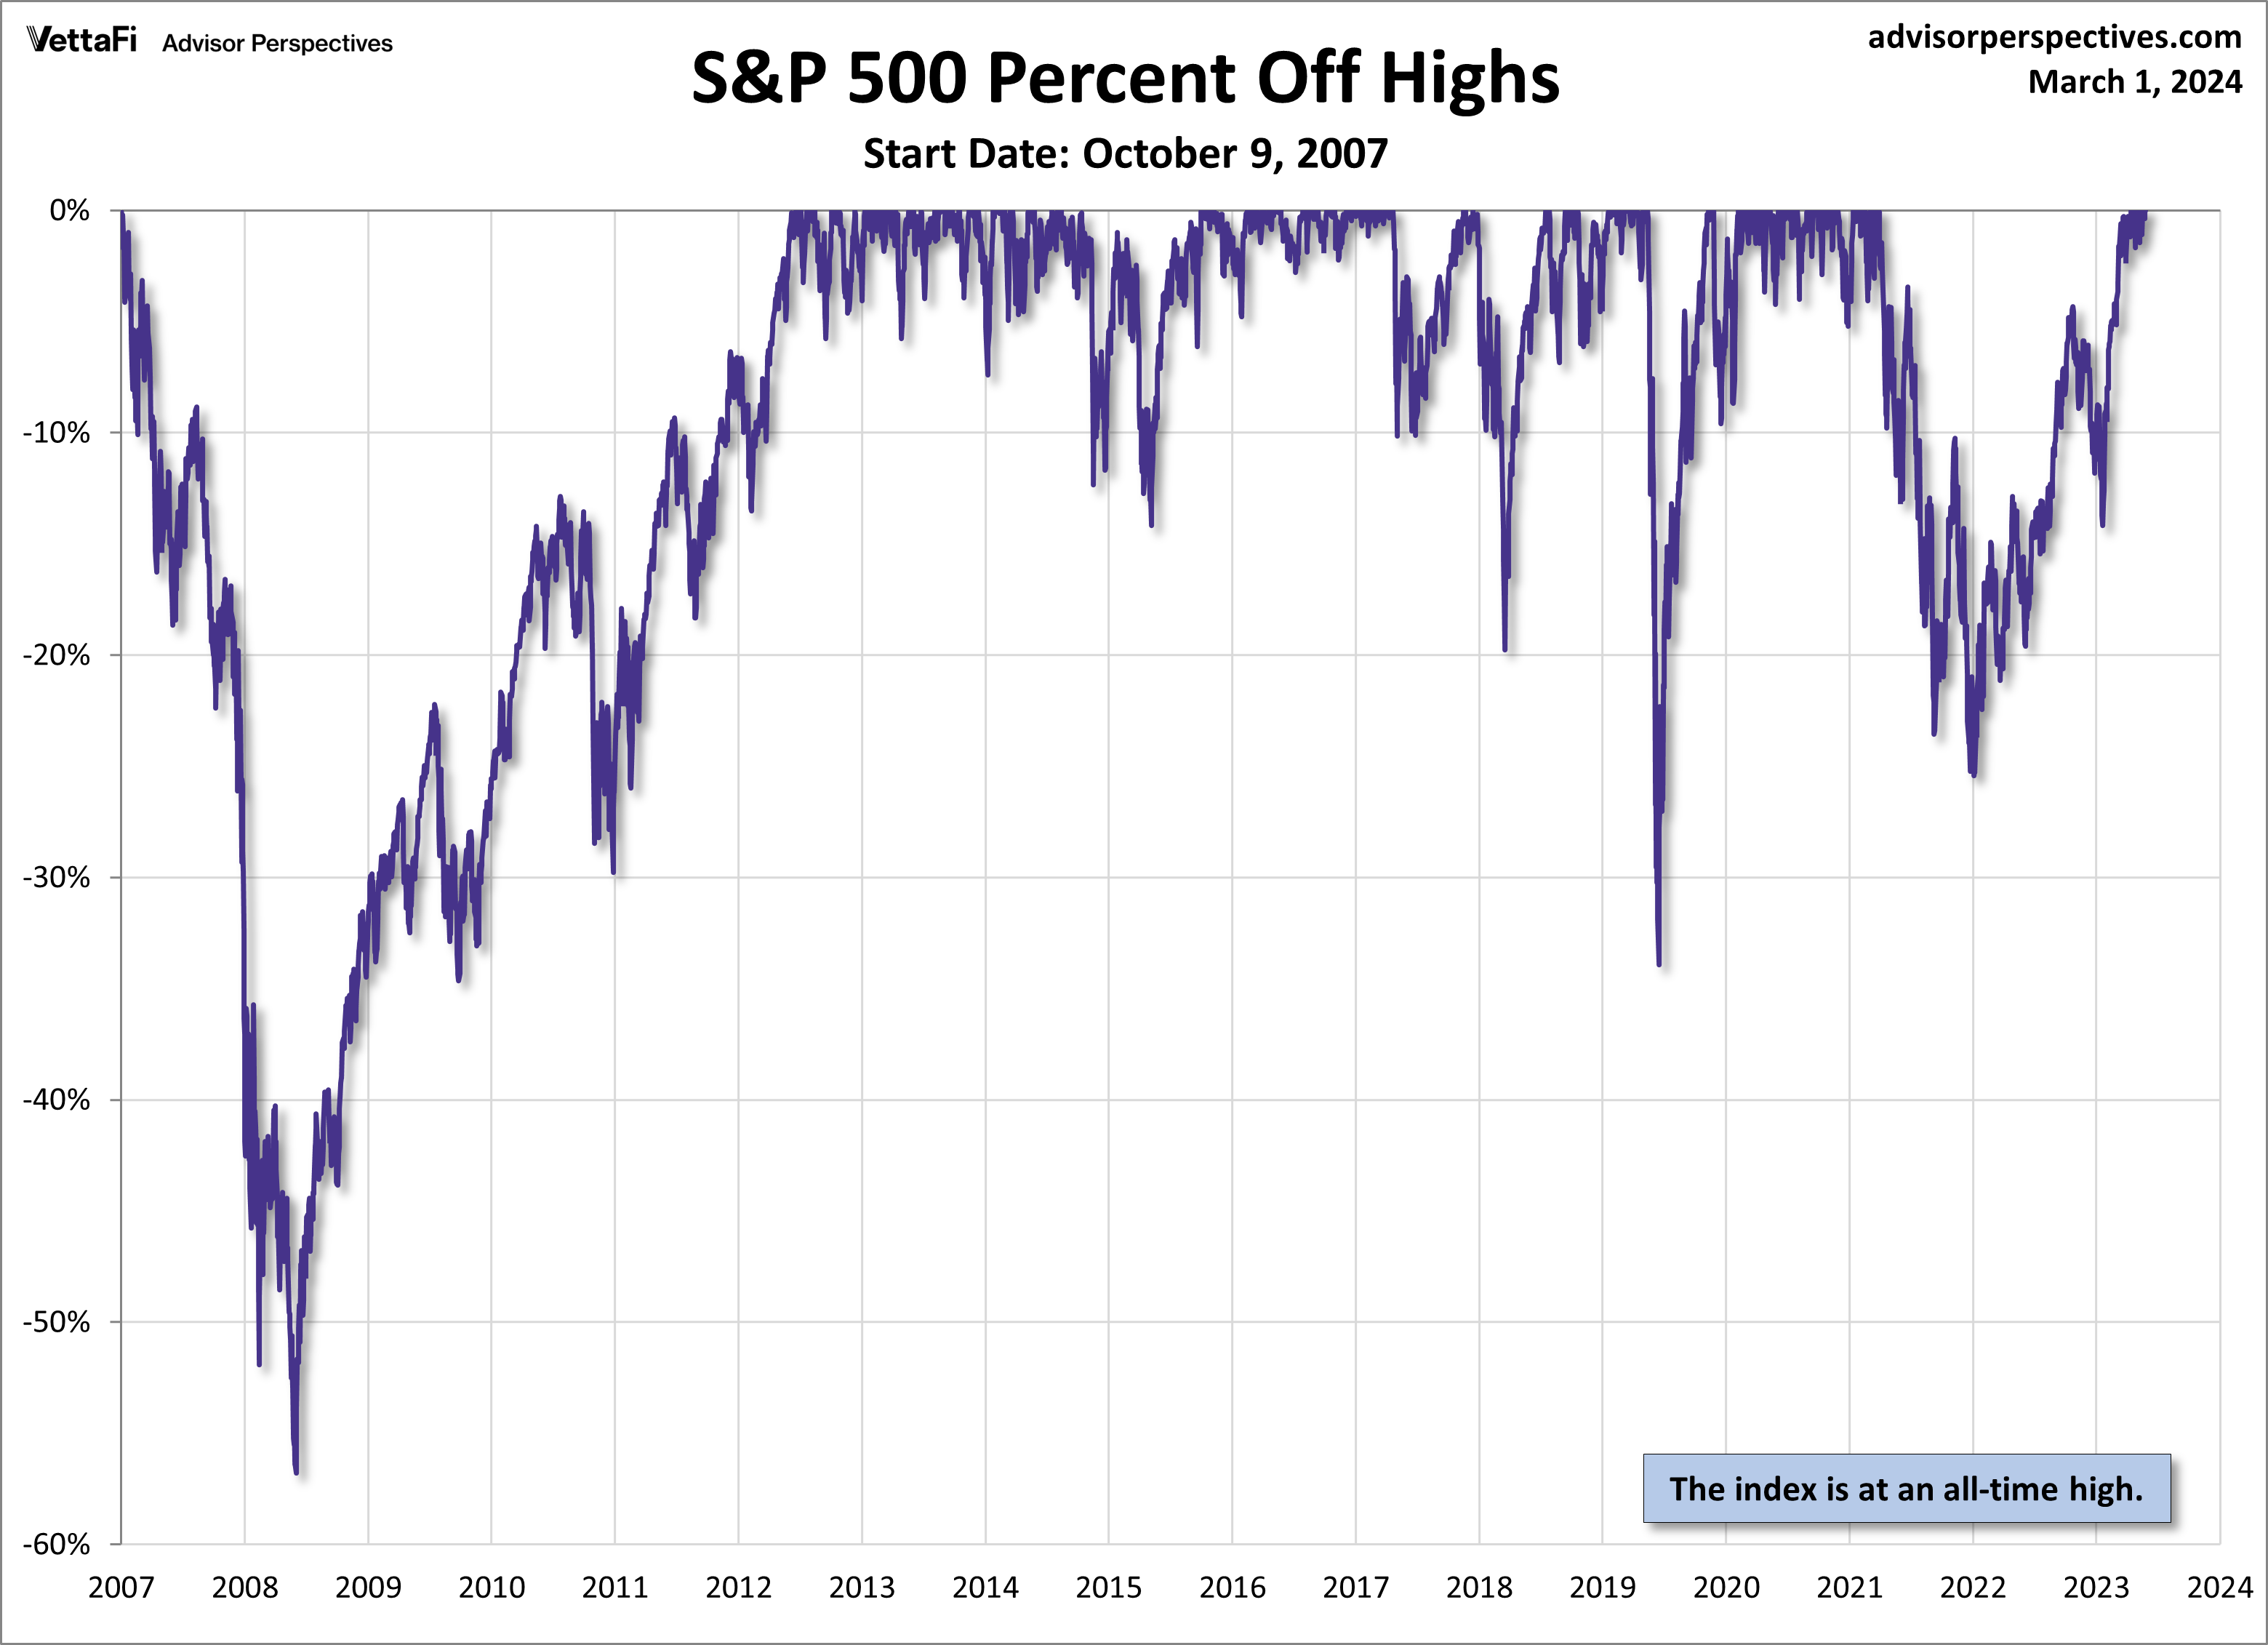 S&P 500 Percent Off Highs from Oct. 9, 2007